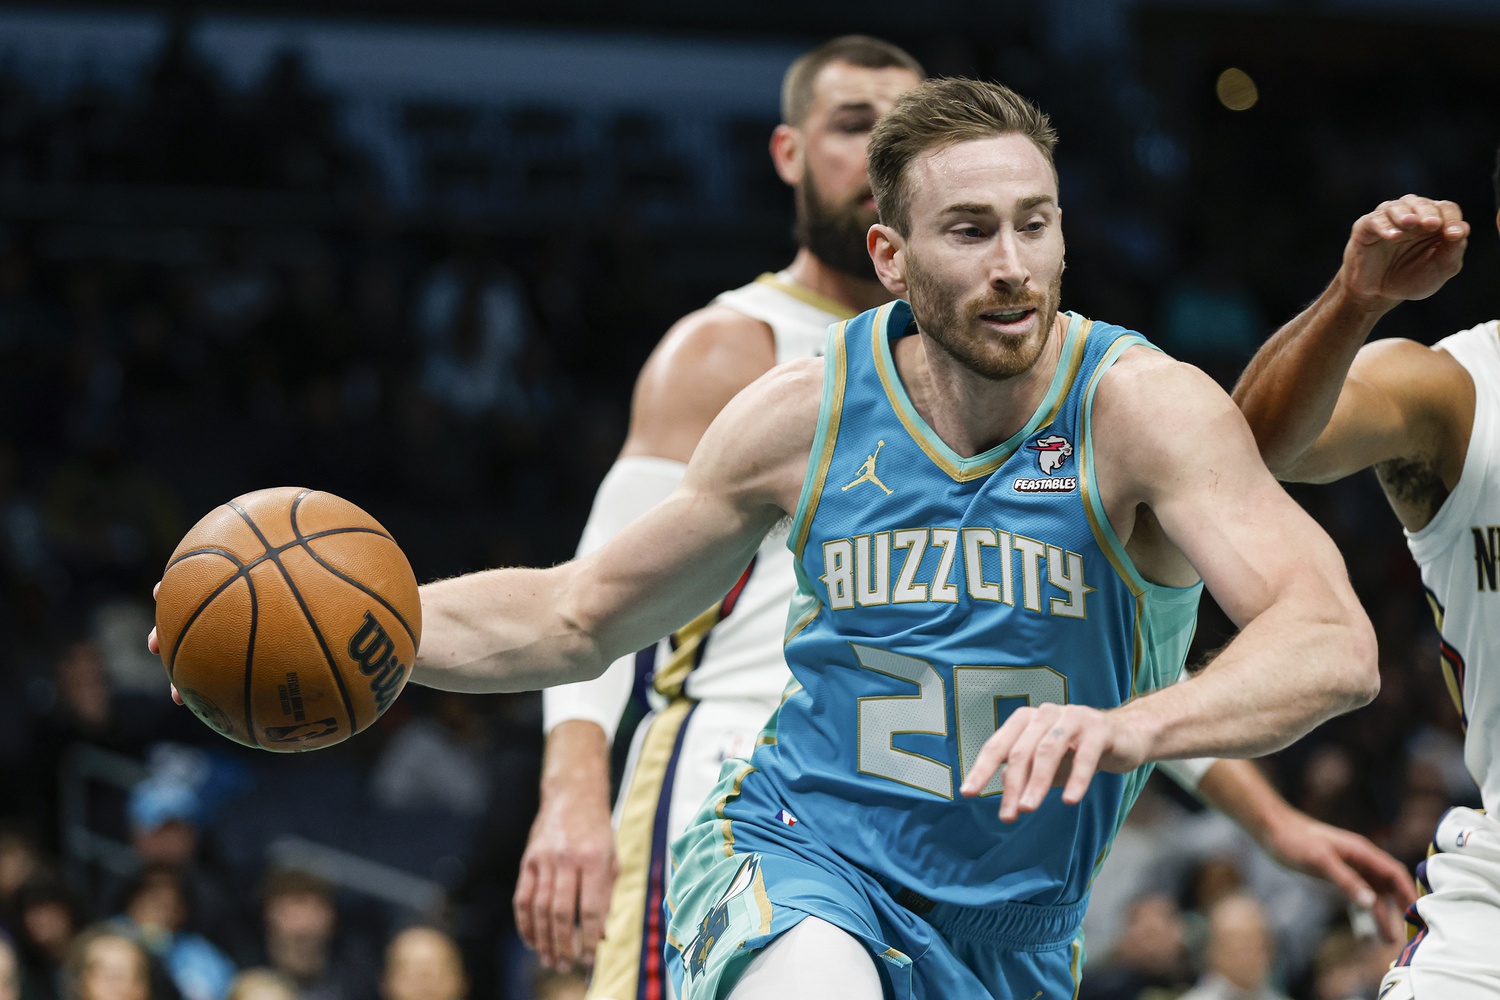 Charlotte Hornets forward Gordon Hayward (20) drives the baseline against the New Orleans Pelicans during the first quarter at Spectrum Center.